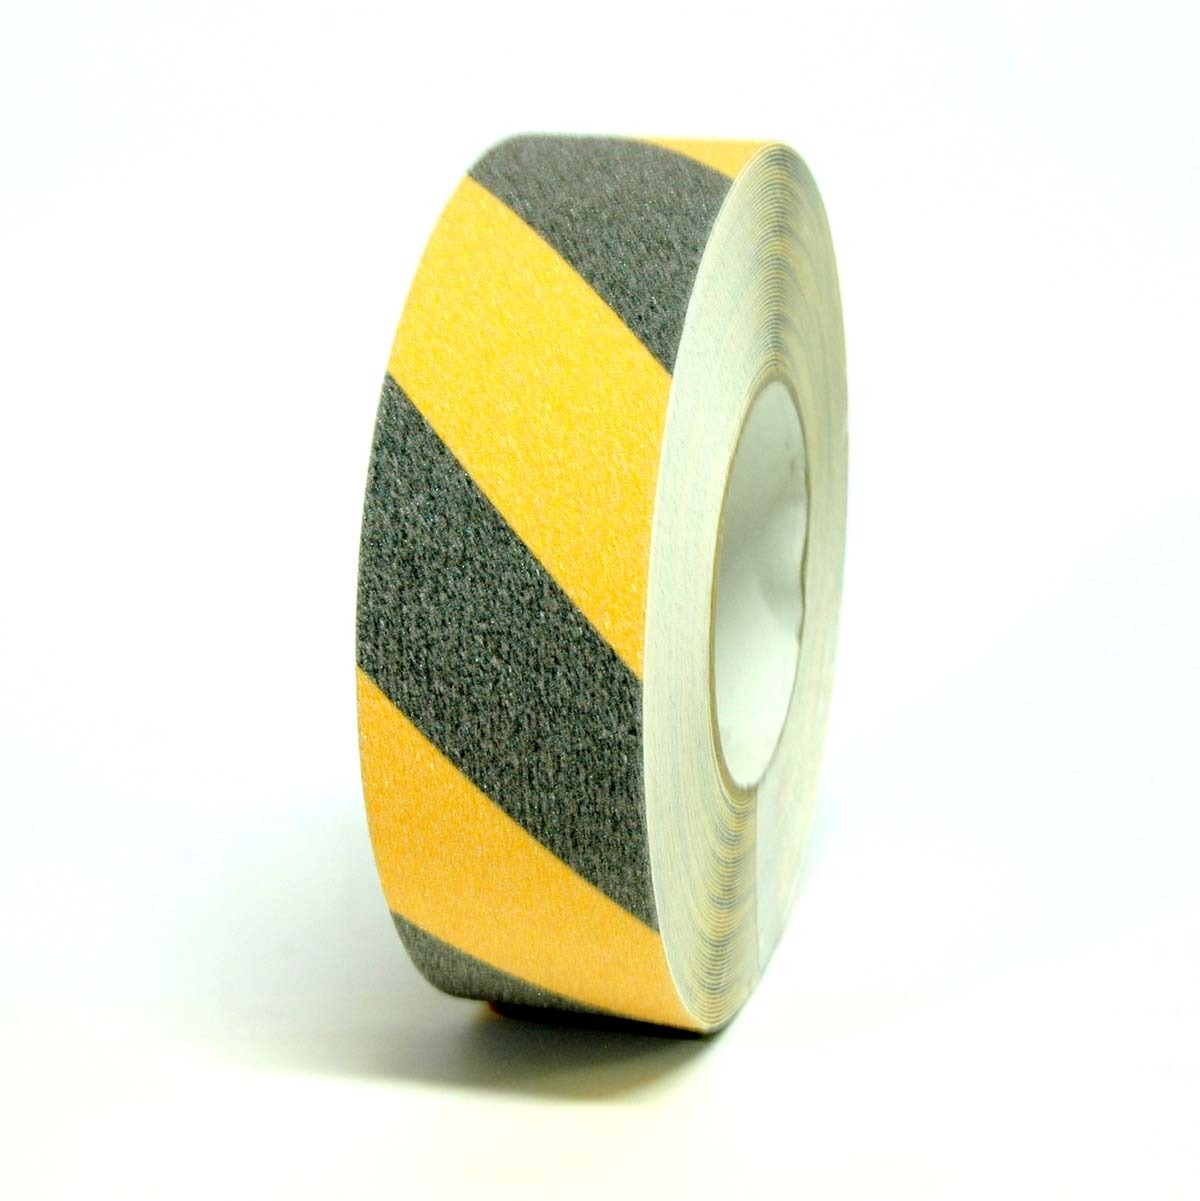 Anti-Slip Yellow Reflective Tape Roll Weather Resistant Indoor Outdoor Use 2"×5M 